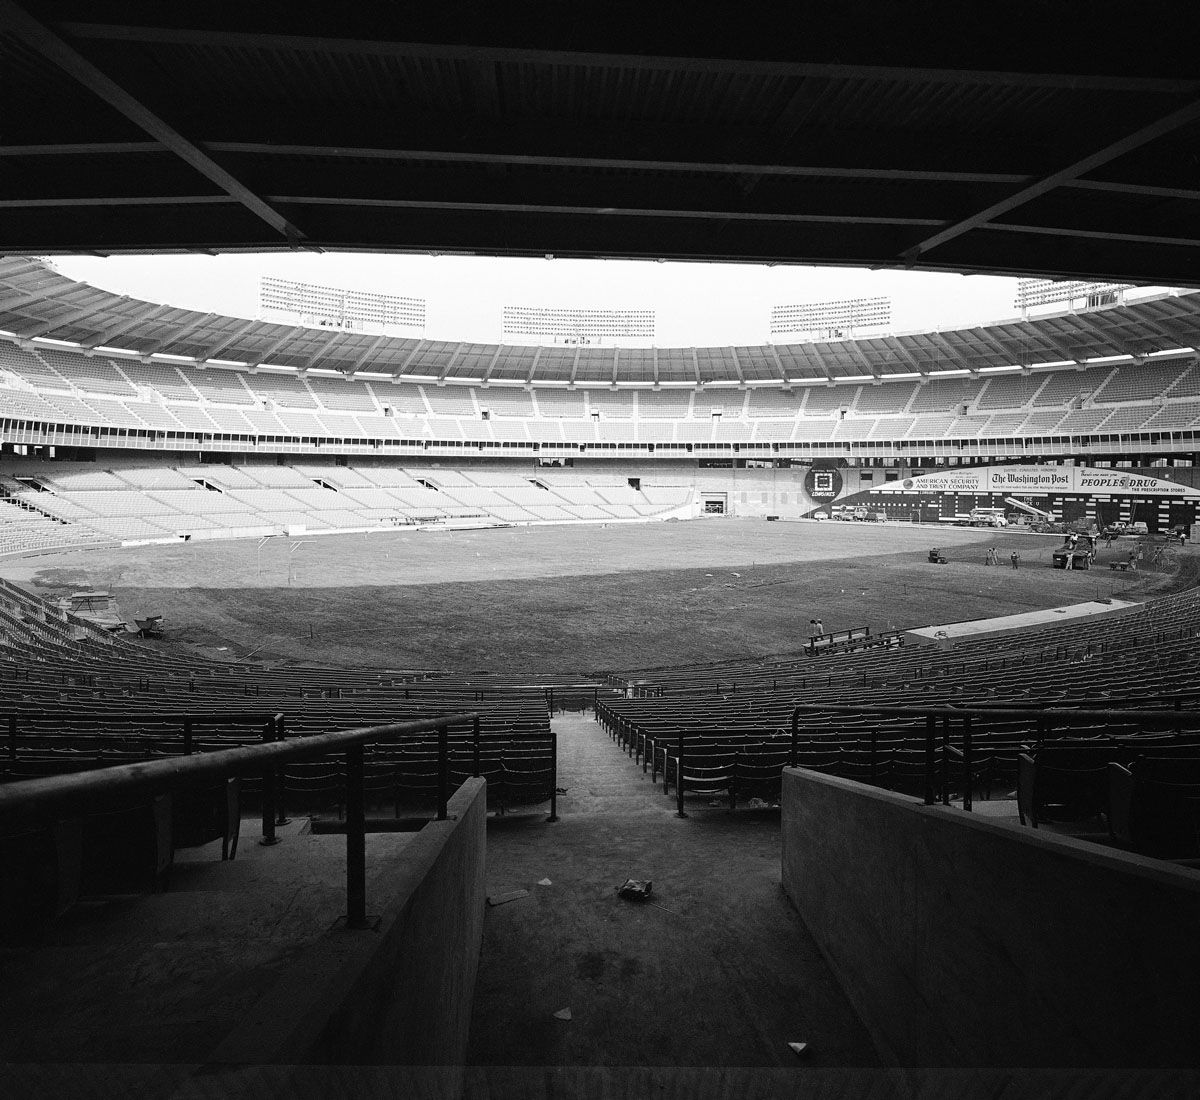 The District of Columbia Stadium in Washington where the Washington Redskins open their National Football League home season on Oct. 1 against the New York Giants, seen Sept. 28, 1961.  Boasting more than 2,100 floodlights, the stadium has a 50,000 seating capacity for football and 43,500 for baseball. It also will be the new home during the baseball season for the Washington Senators. Both the Redskins and the Senators have been using Washington's Griffith Stadium. (AP Photo/William J. Smith)